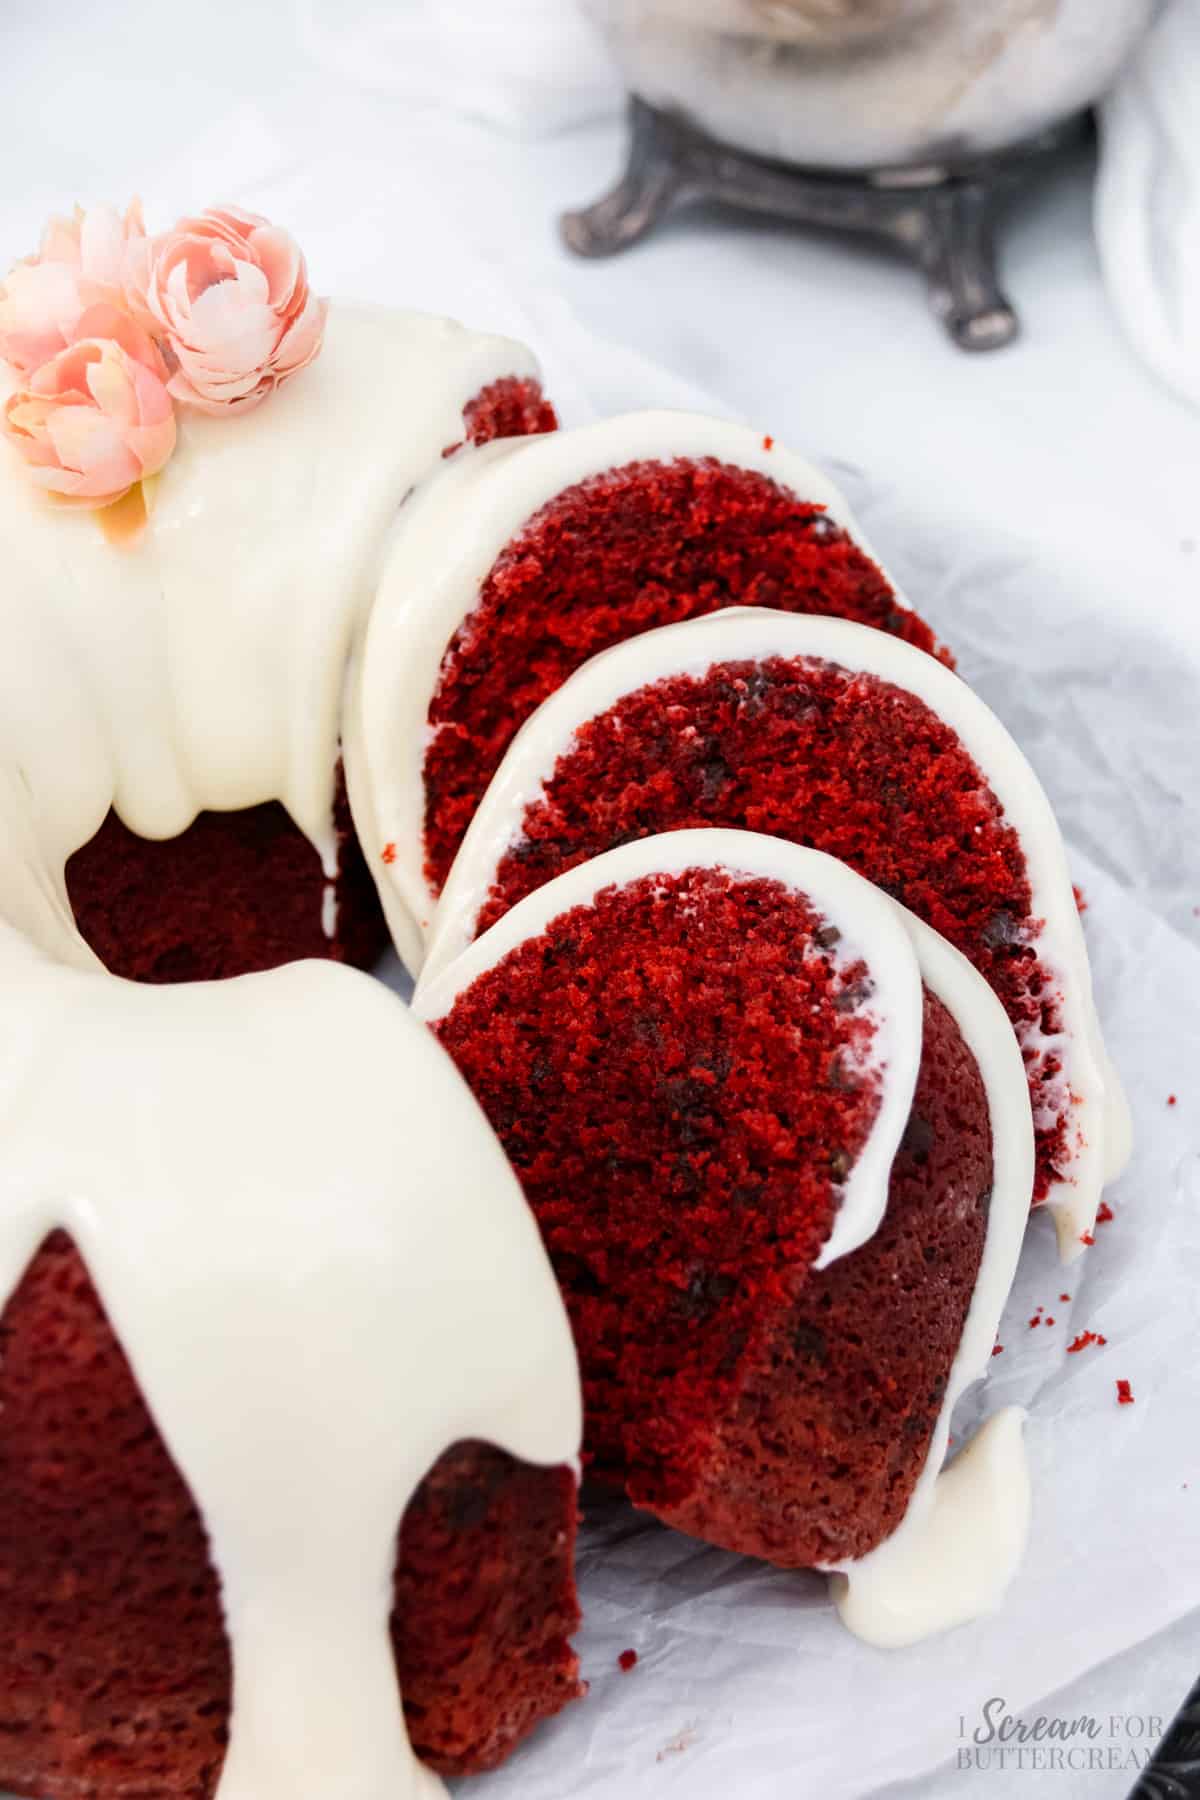 Top view of slices of red velvet cake.